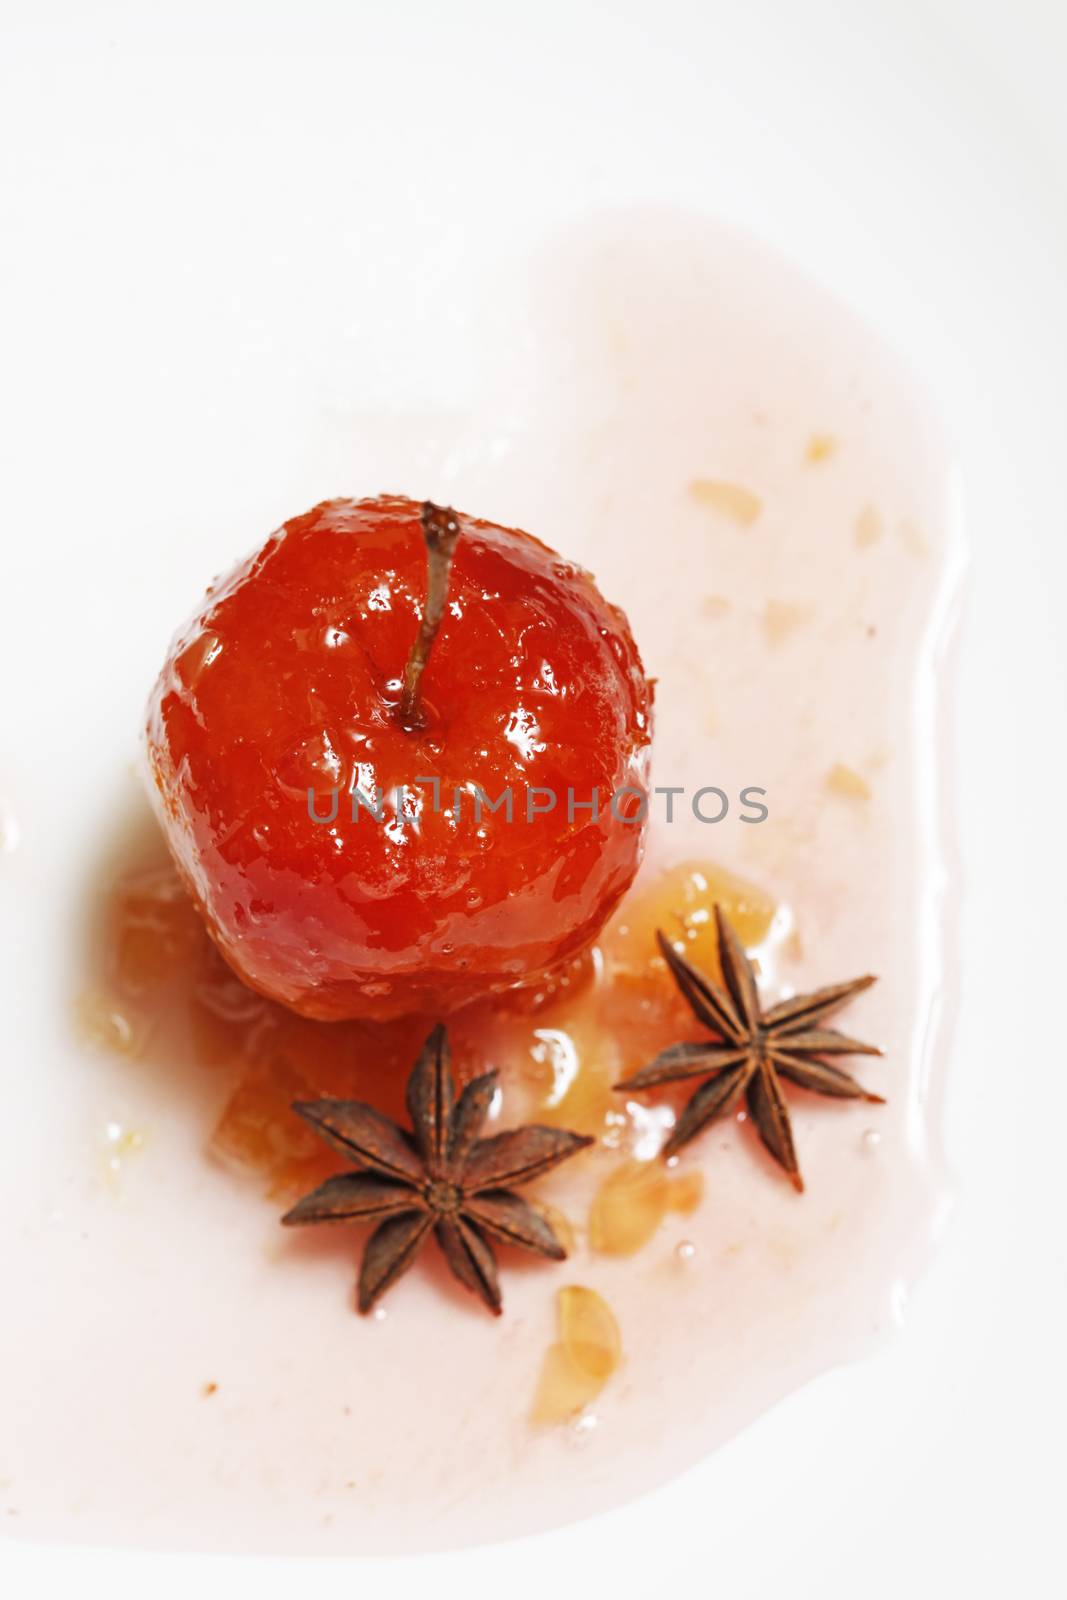 Red apple in rose syrup with small pieces of zucchini and with anise over isolated white background